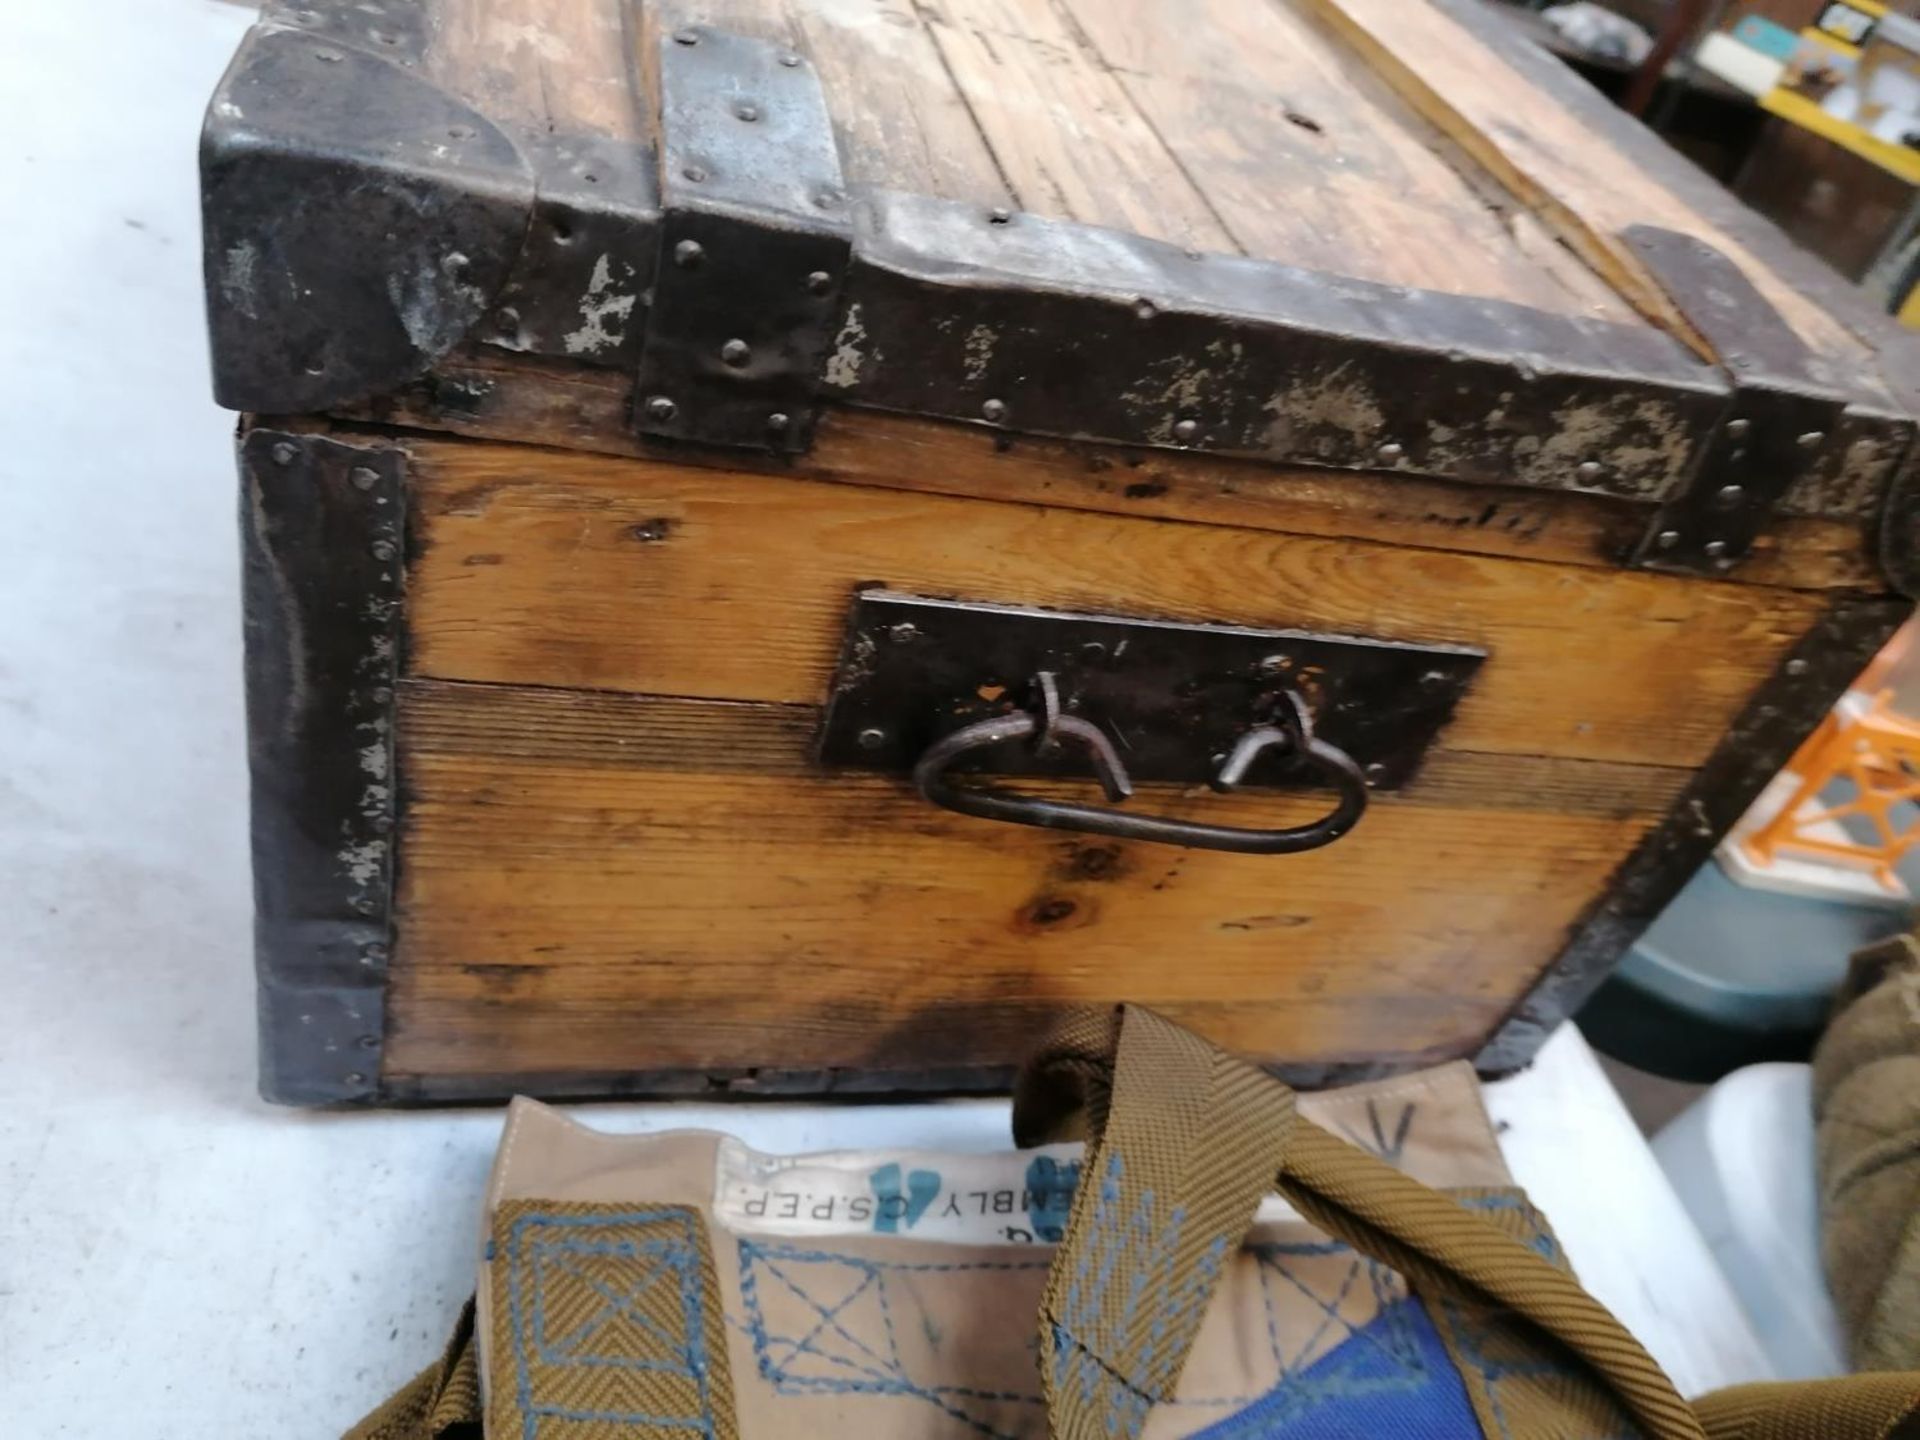 A VINTAGE FRENCH OAK GUN AMMO CHEST WITH METAL BANDING AND TWO METAL SIDE HANDLES - Image 3 of 3